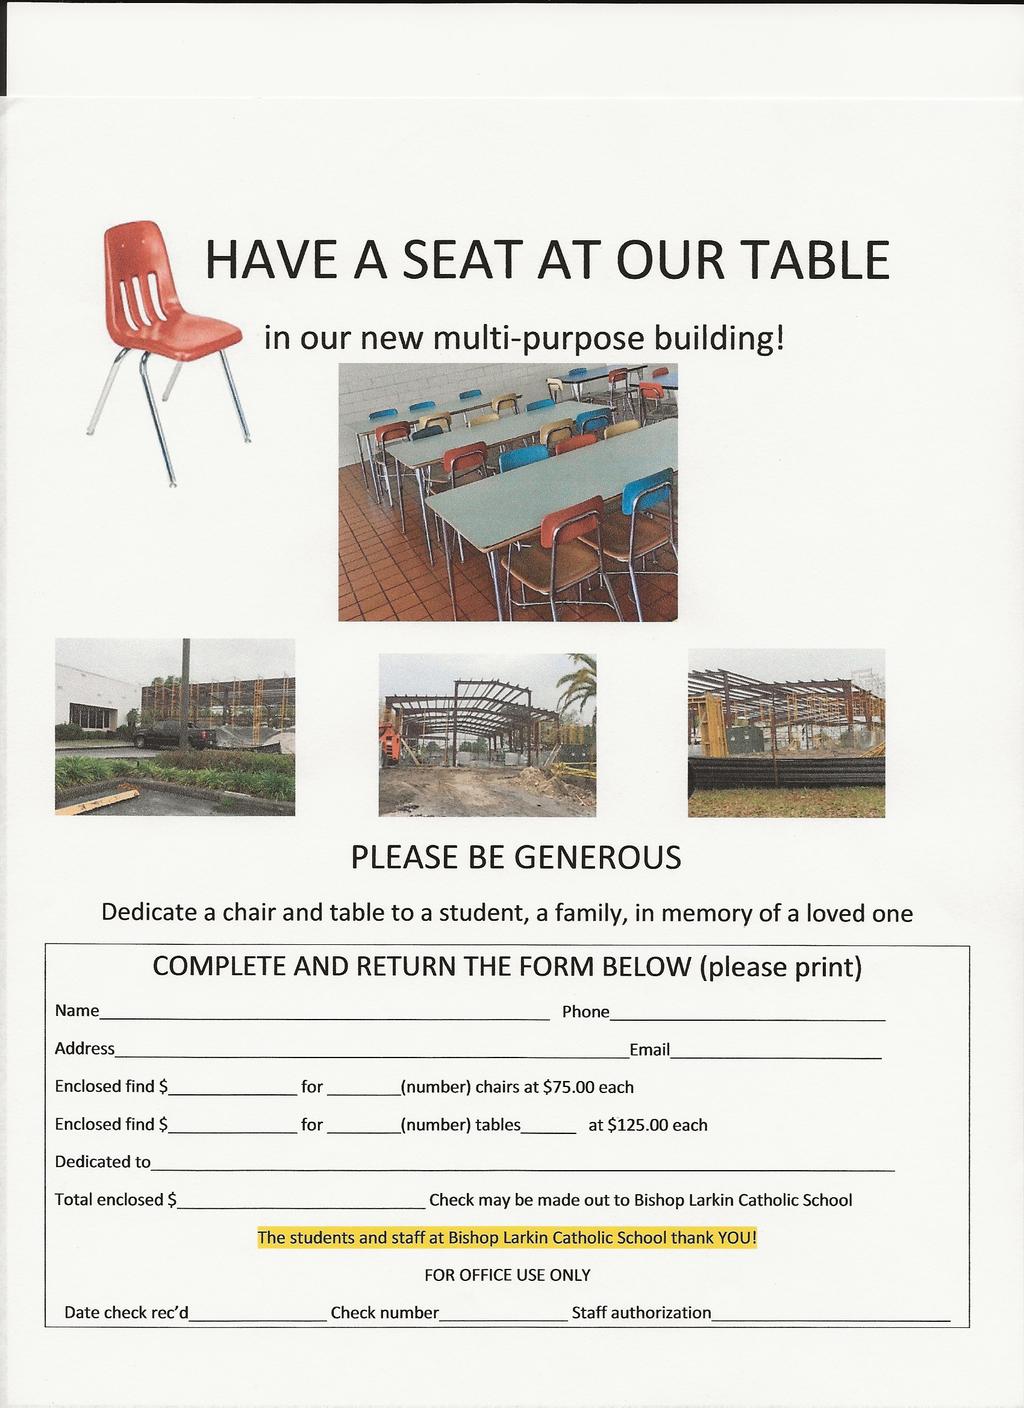 BISHOP LARKIN INVITES YOU TO HAVE A SEAT! We are offering you a seat at our table in our new multi-purpose building. Just complete the form below and return it to the school.